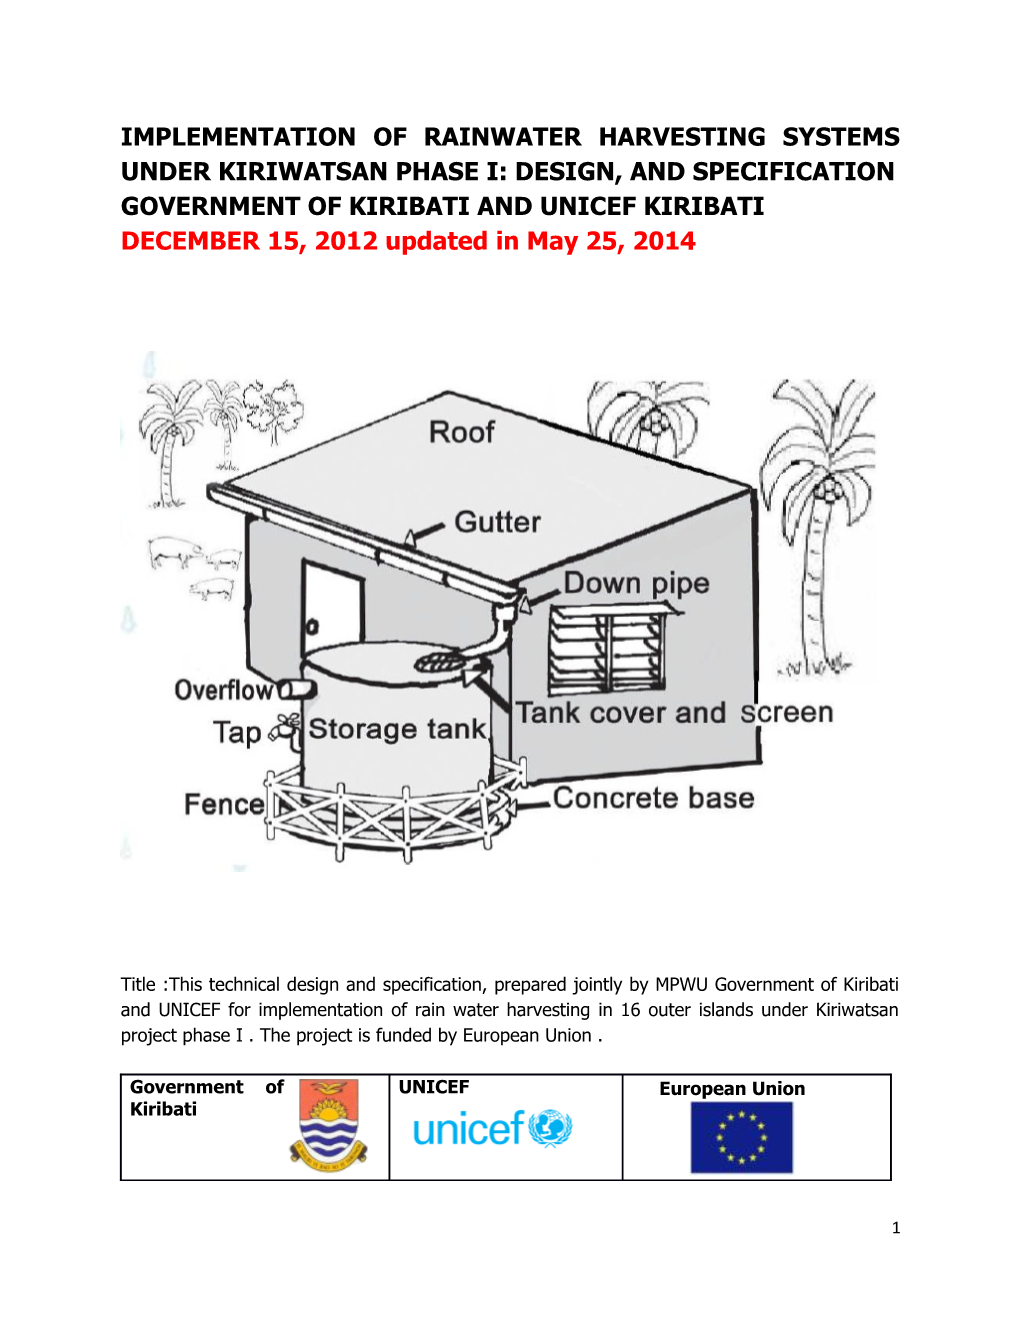 Implementation of Rainwater Harvesting Systems Under Kiriwatsan Phase I: Design, And